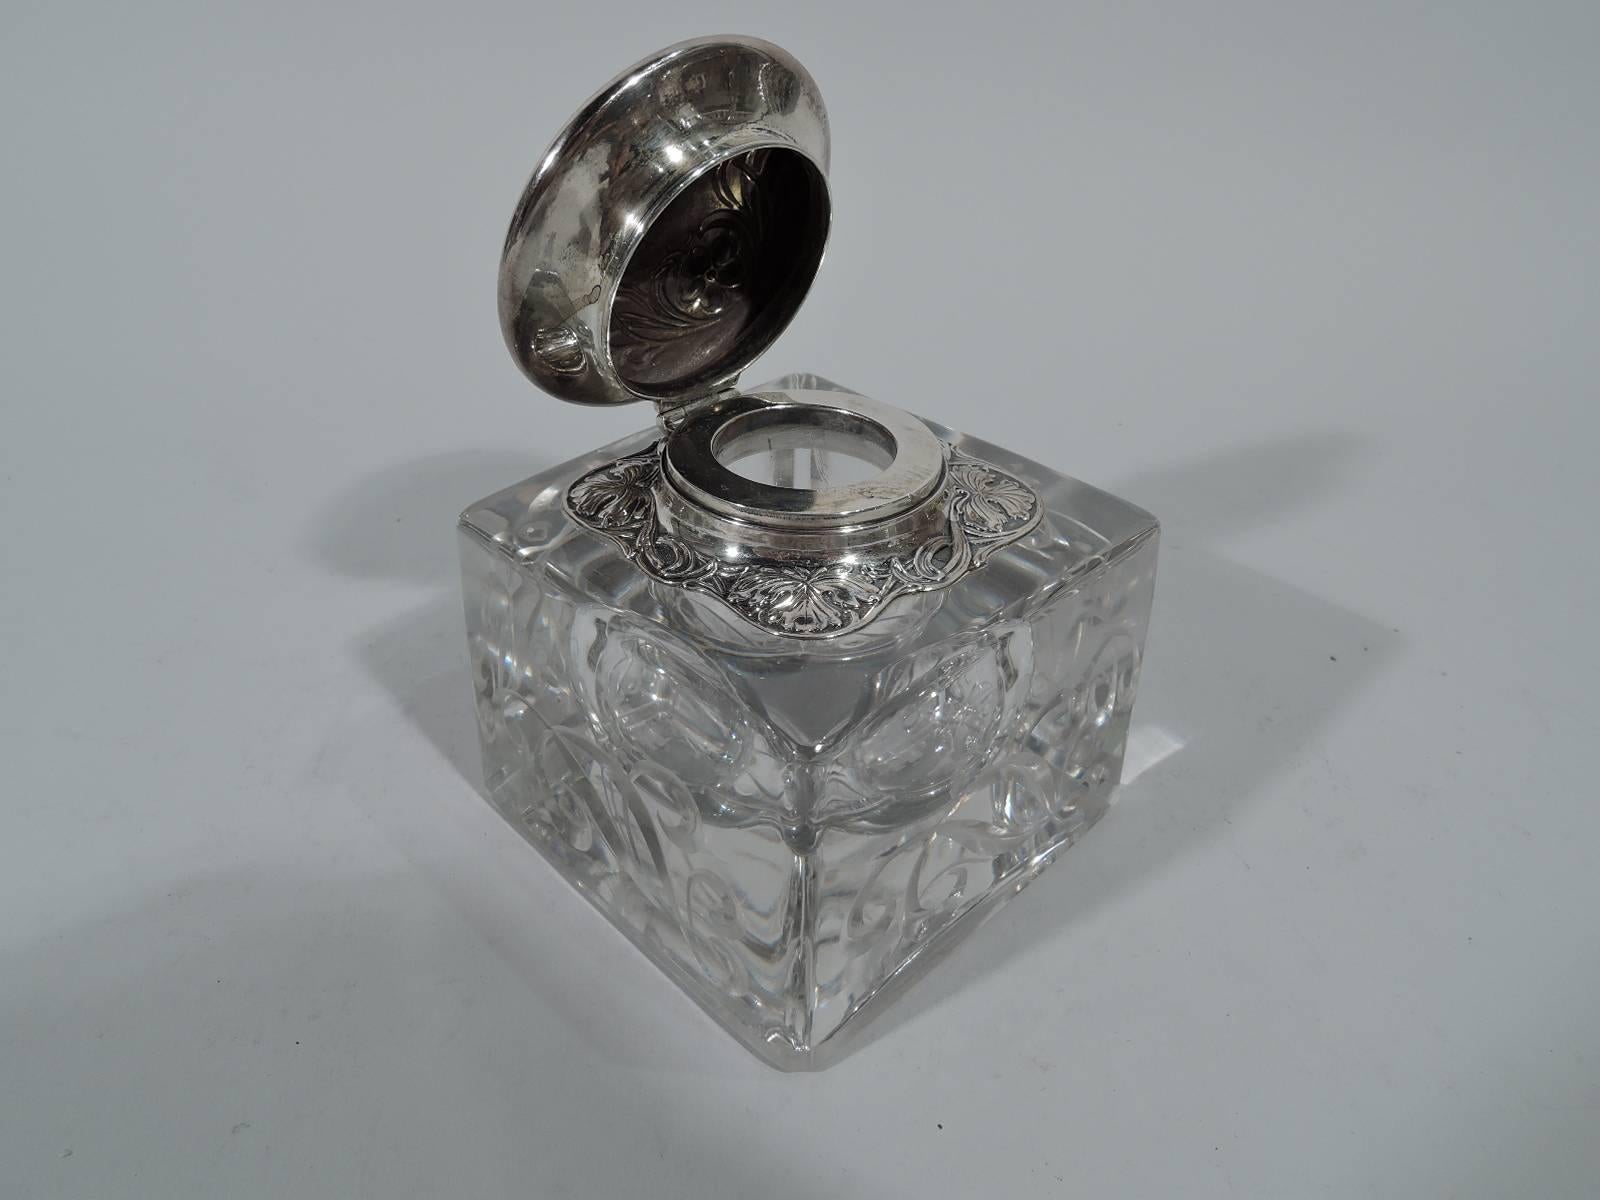 Art Nouveau glass and sterling silver inkwell. Made by Gorham in Providence. Rectilinear clear glass block bulbous well. Sides have carved ornament: Fluid scrollwork and stylized flowers. Short neck in sterling silver collar surrounded by squarish